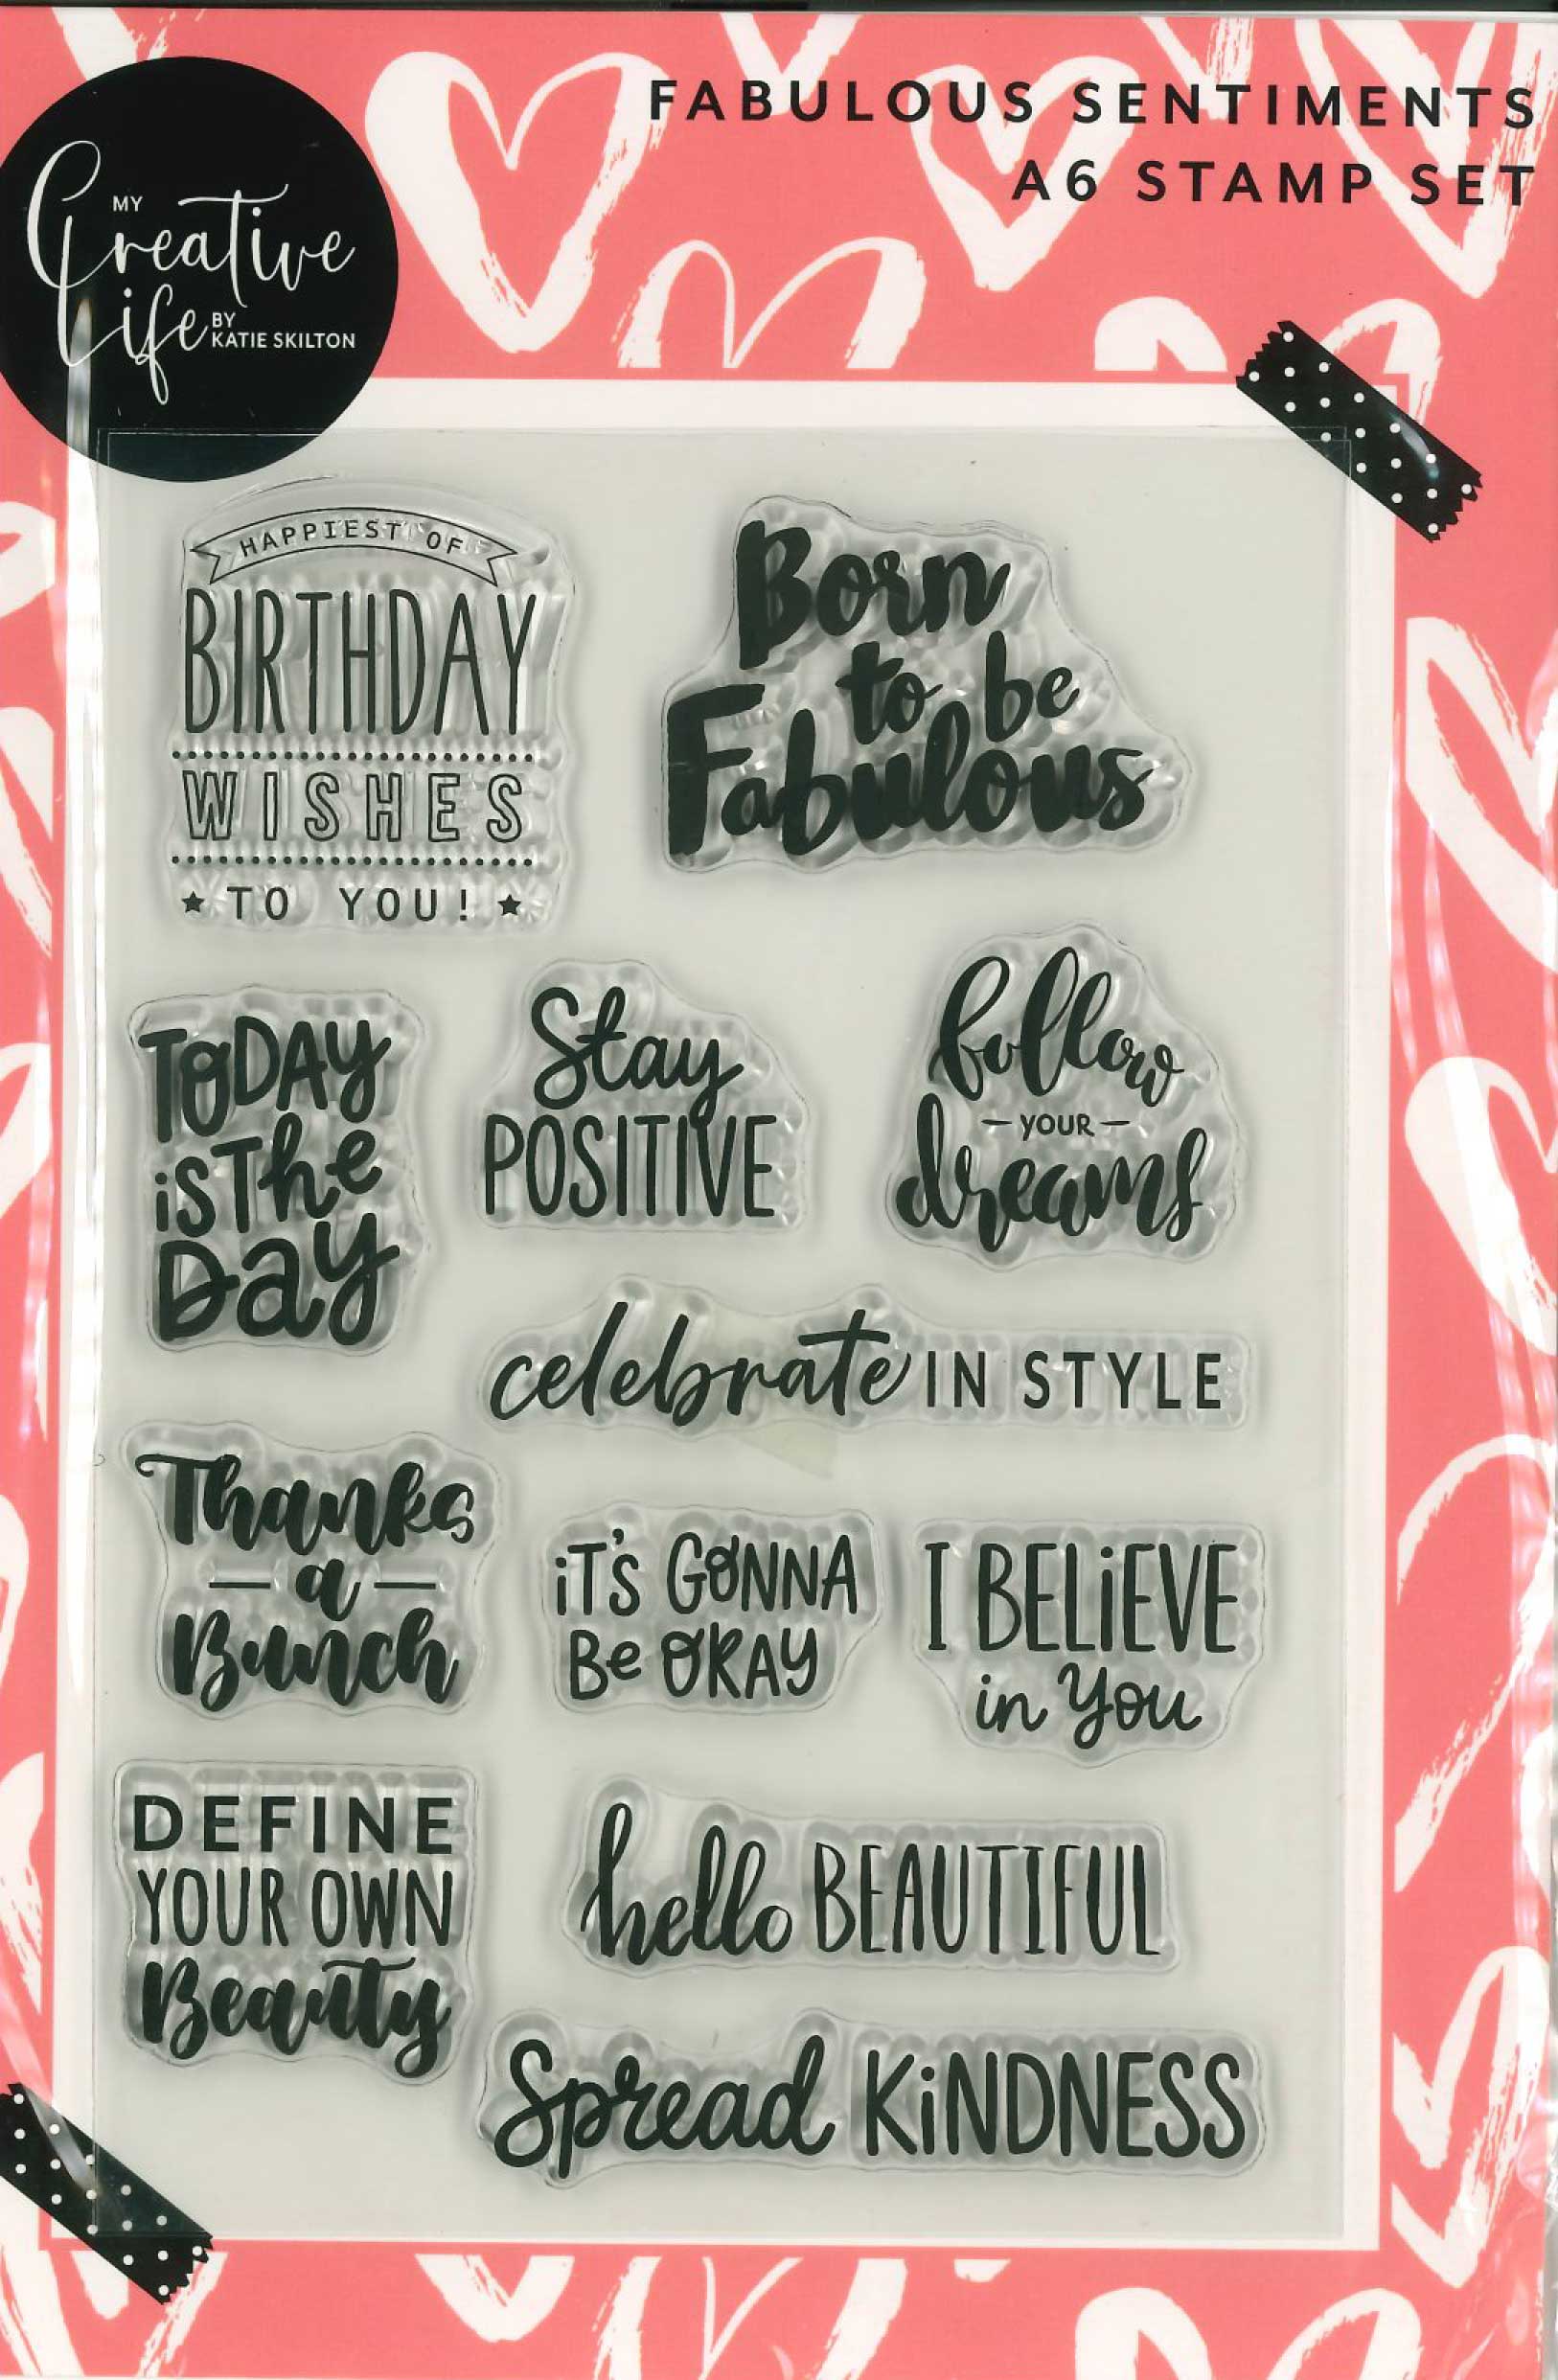 Fabulous Sentiments A6 Stamp Set | Gorgeous Girls